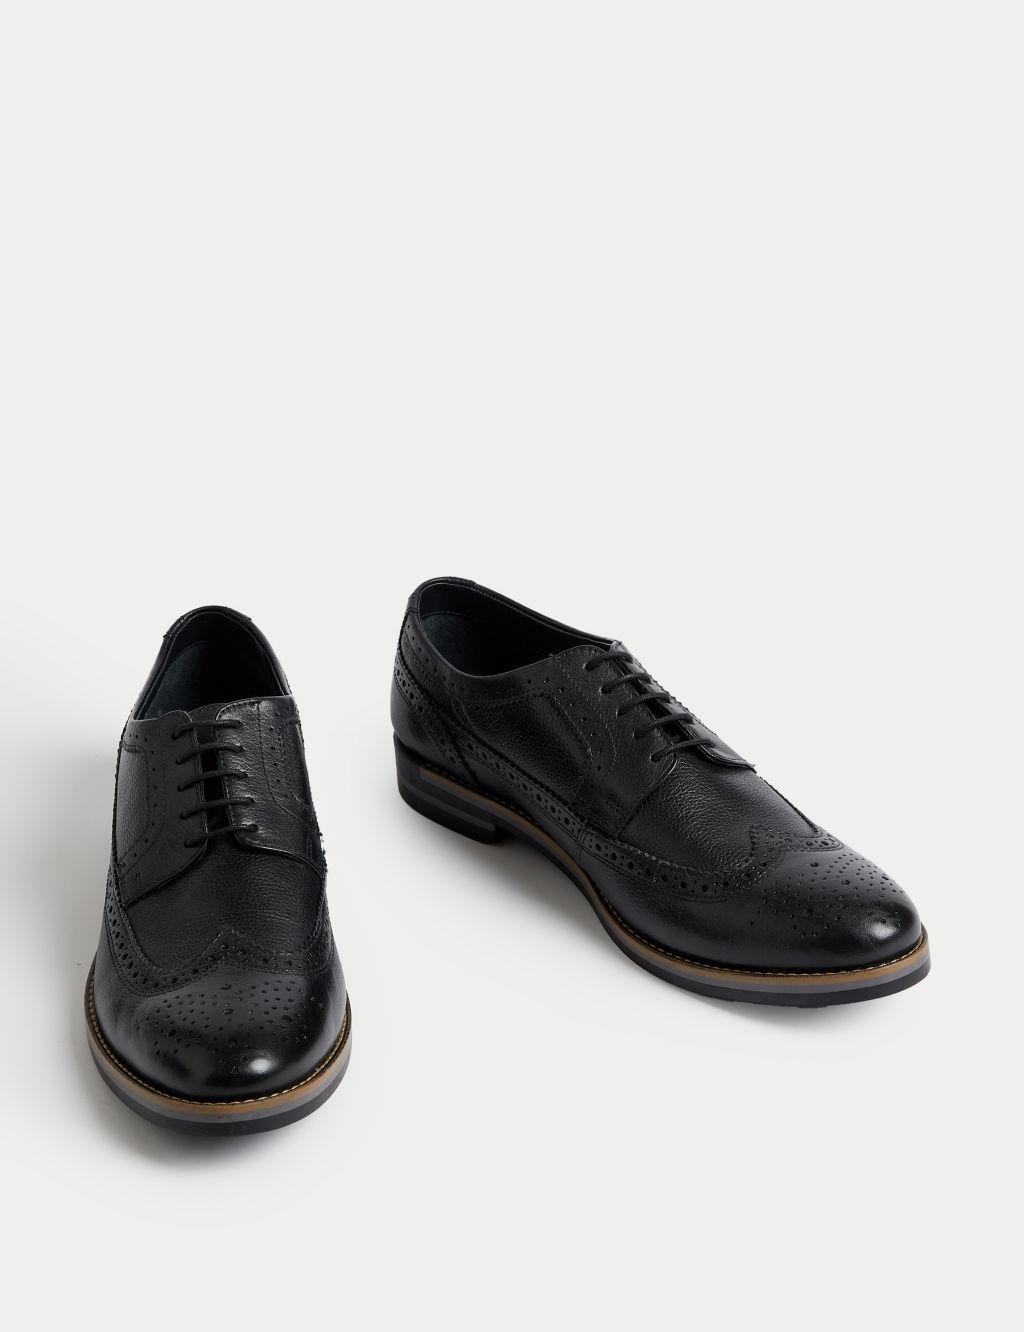 Leather Trisole Brogues image 2